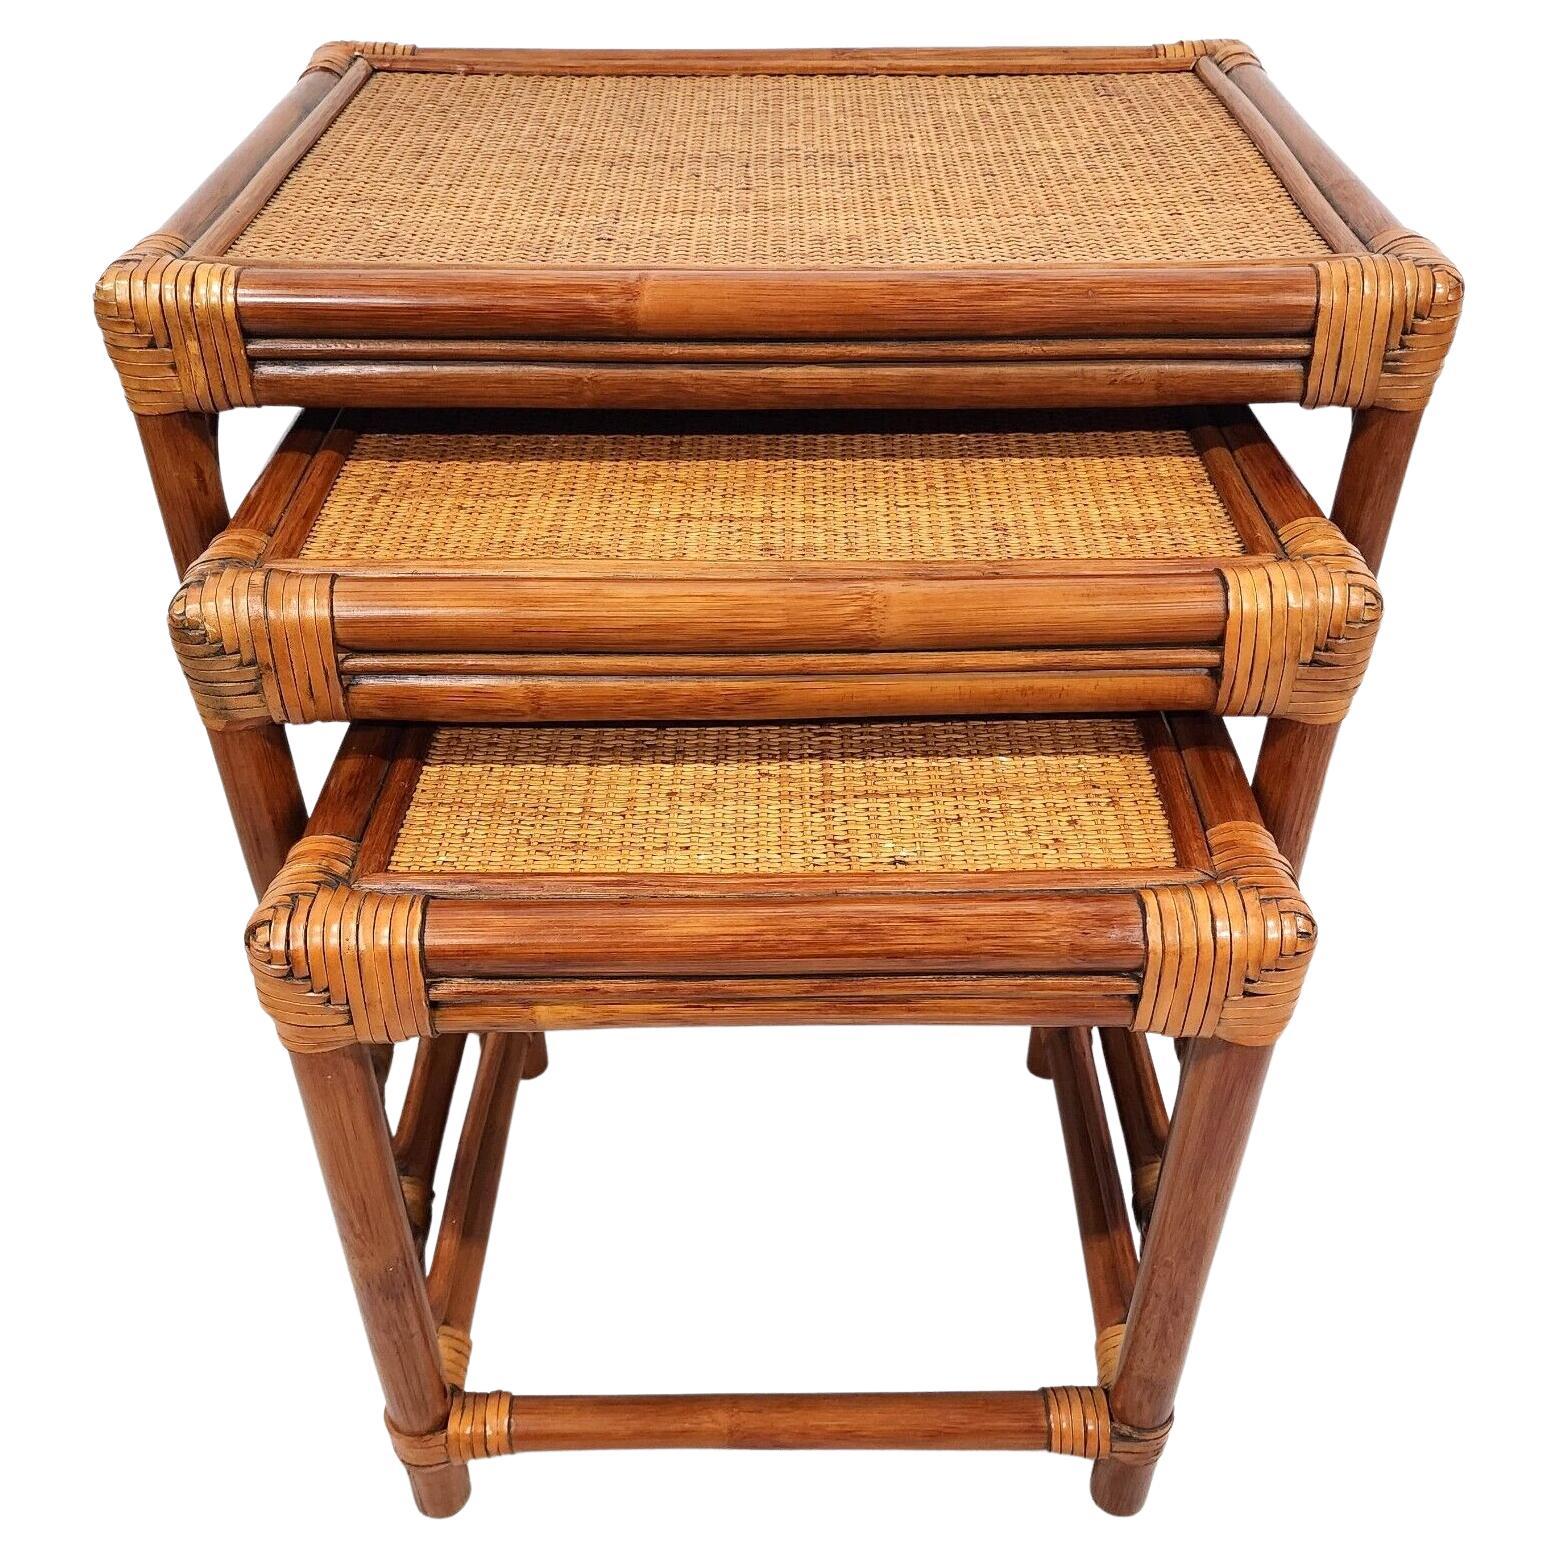 Bamboo Nesting Tables Rattan Wicker Set of 3